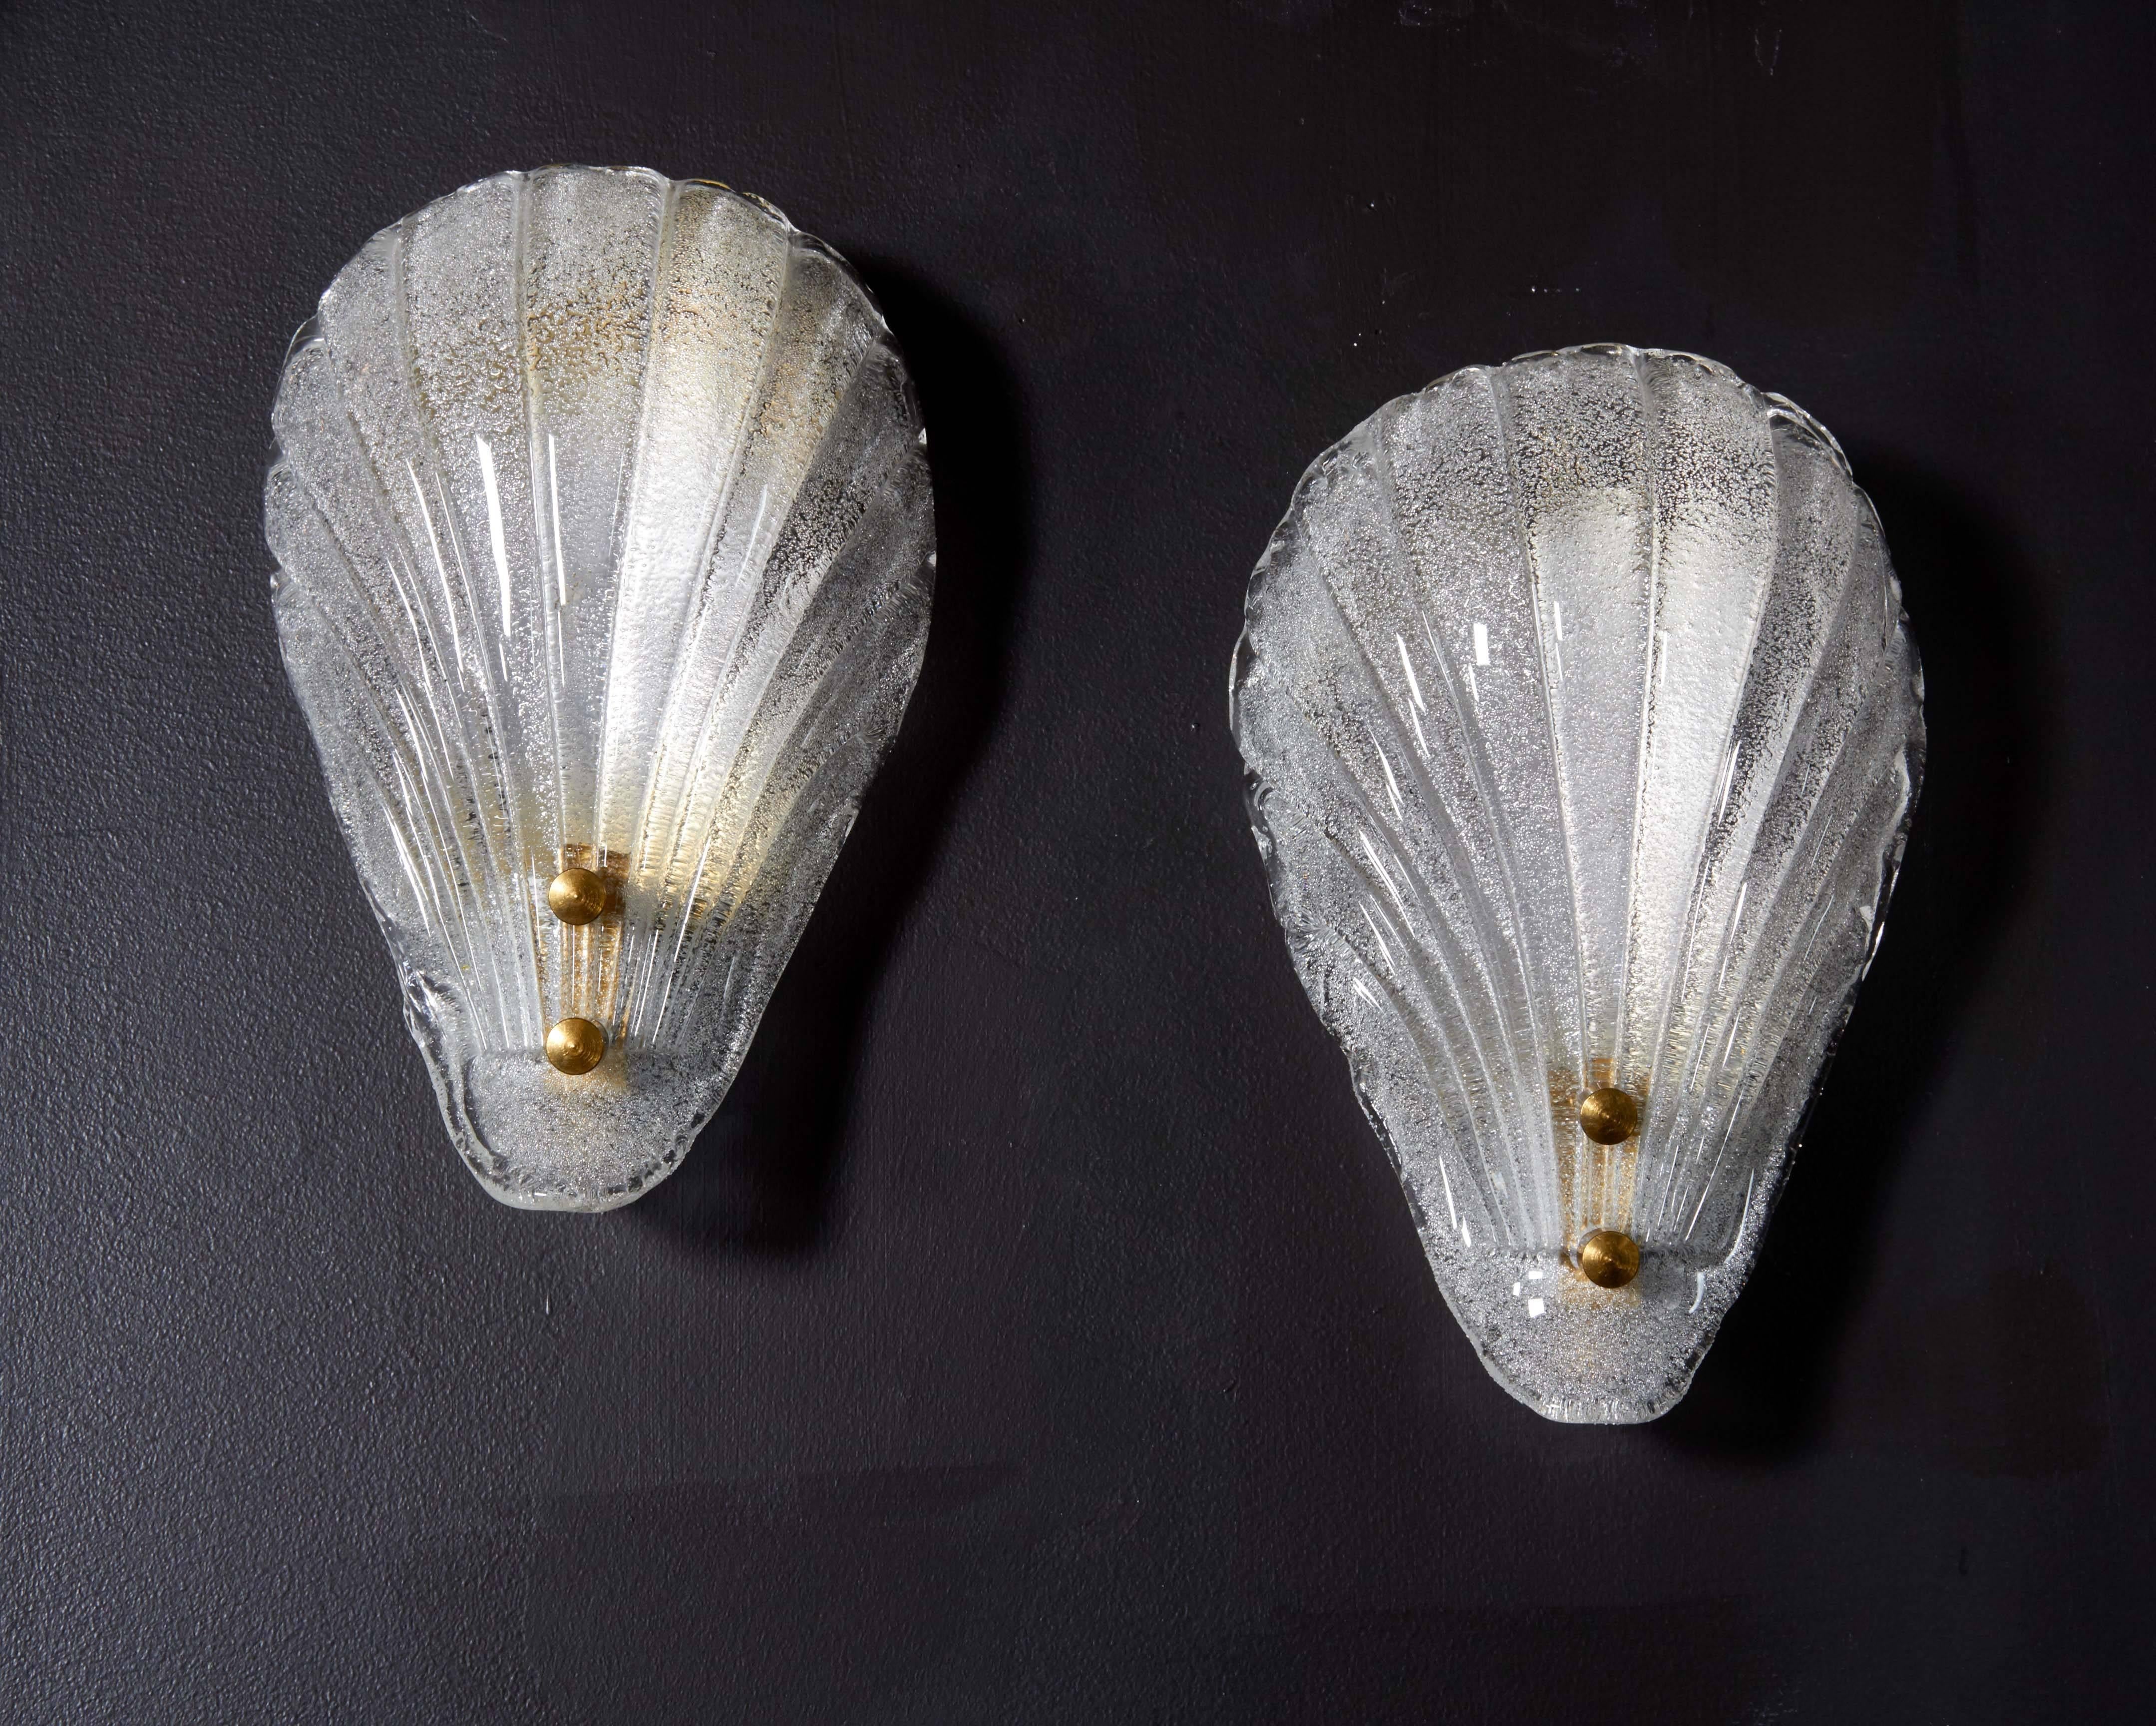 Elegant wall lights featuring stylized sea shell design in handblown Murano glass. Shades have fluted details and textural bubble technique. The hidden frame is finished in a polished brass with matching stud fittings, and has been newly rewired to